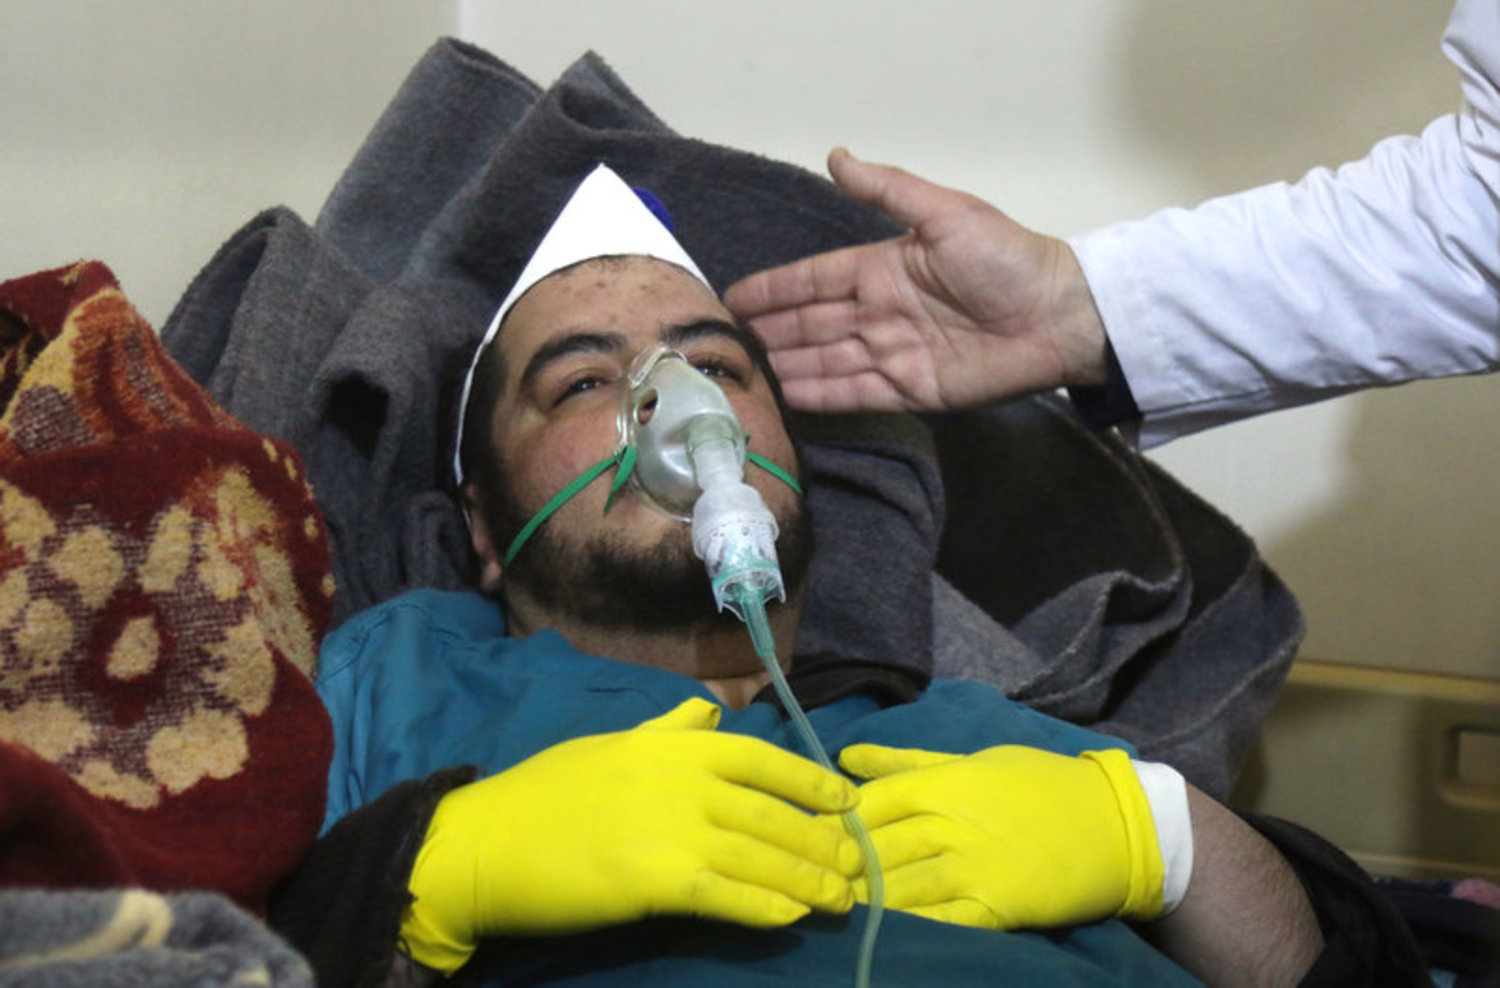 A Syrian man receives treatment following a suspected toxic chemical attack Tuesday in Khan Shaykhun, a rebel-held town in Syria's northwestern Idlib province. At least 72 people were killed, including a number of children. Mohamed al-Bakour/AFP